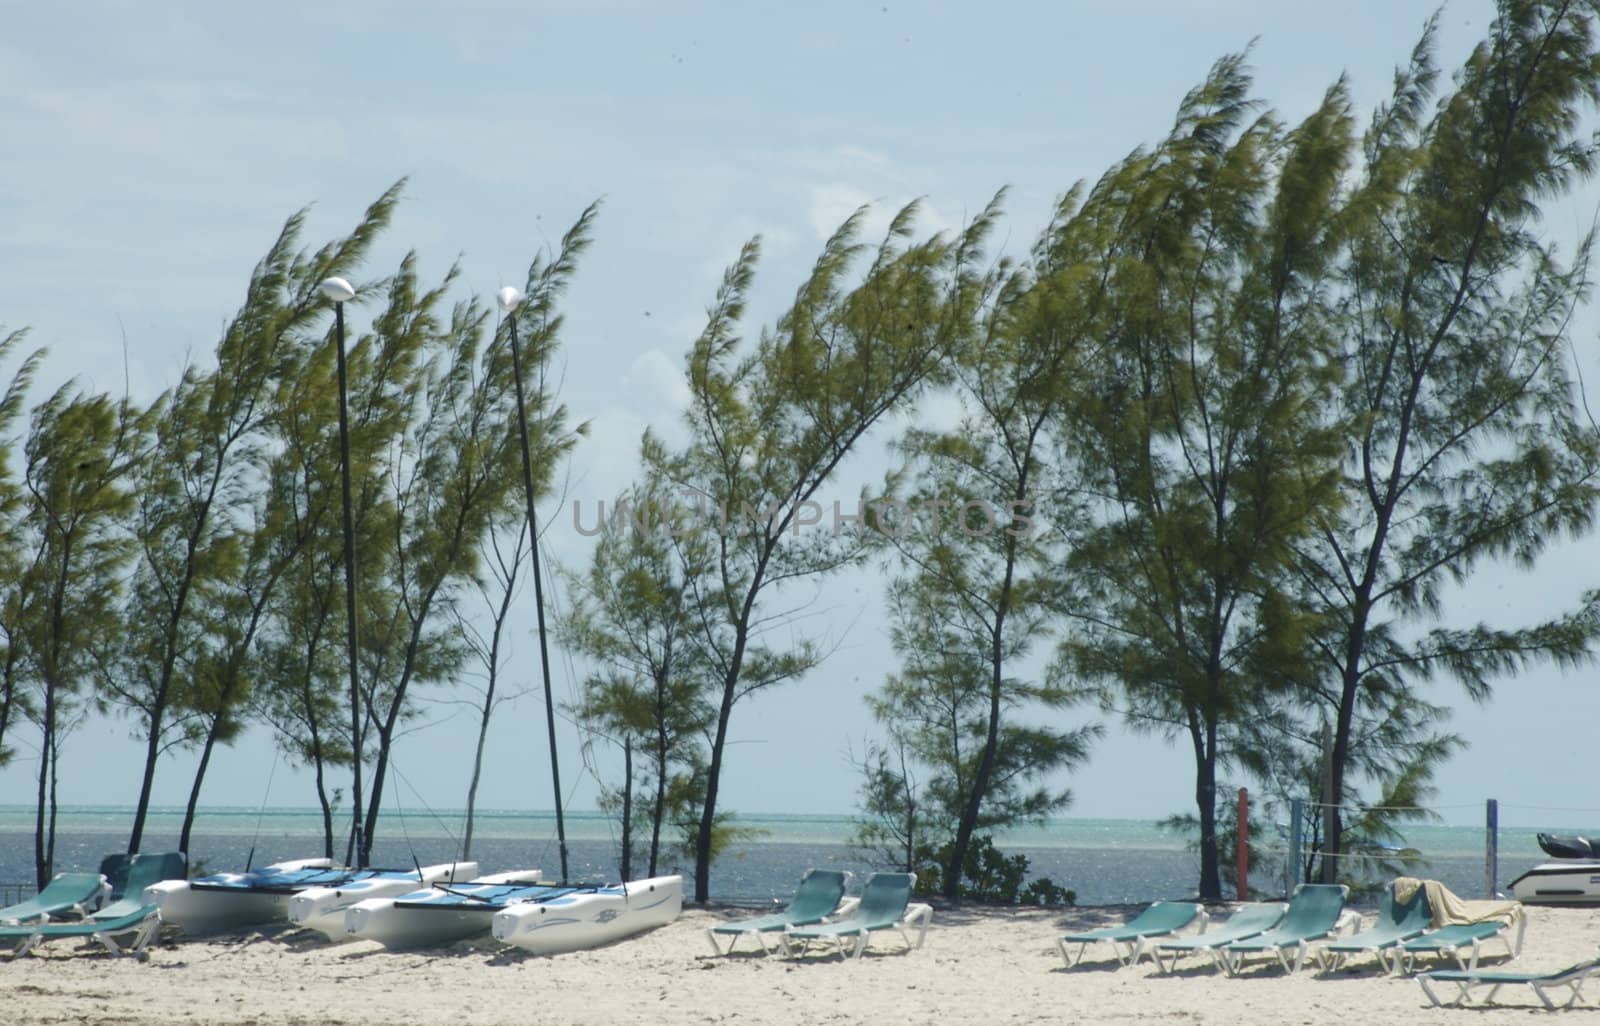 Kayaks lined up on a Bahamian white sandy beach with swaying trees against a blue sky